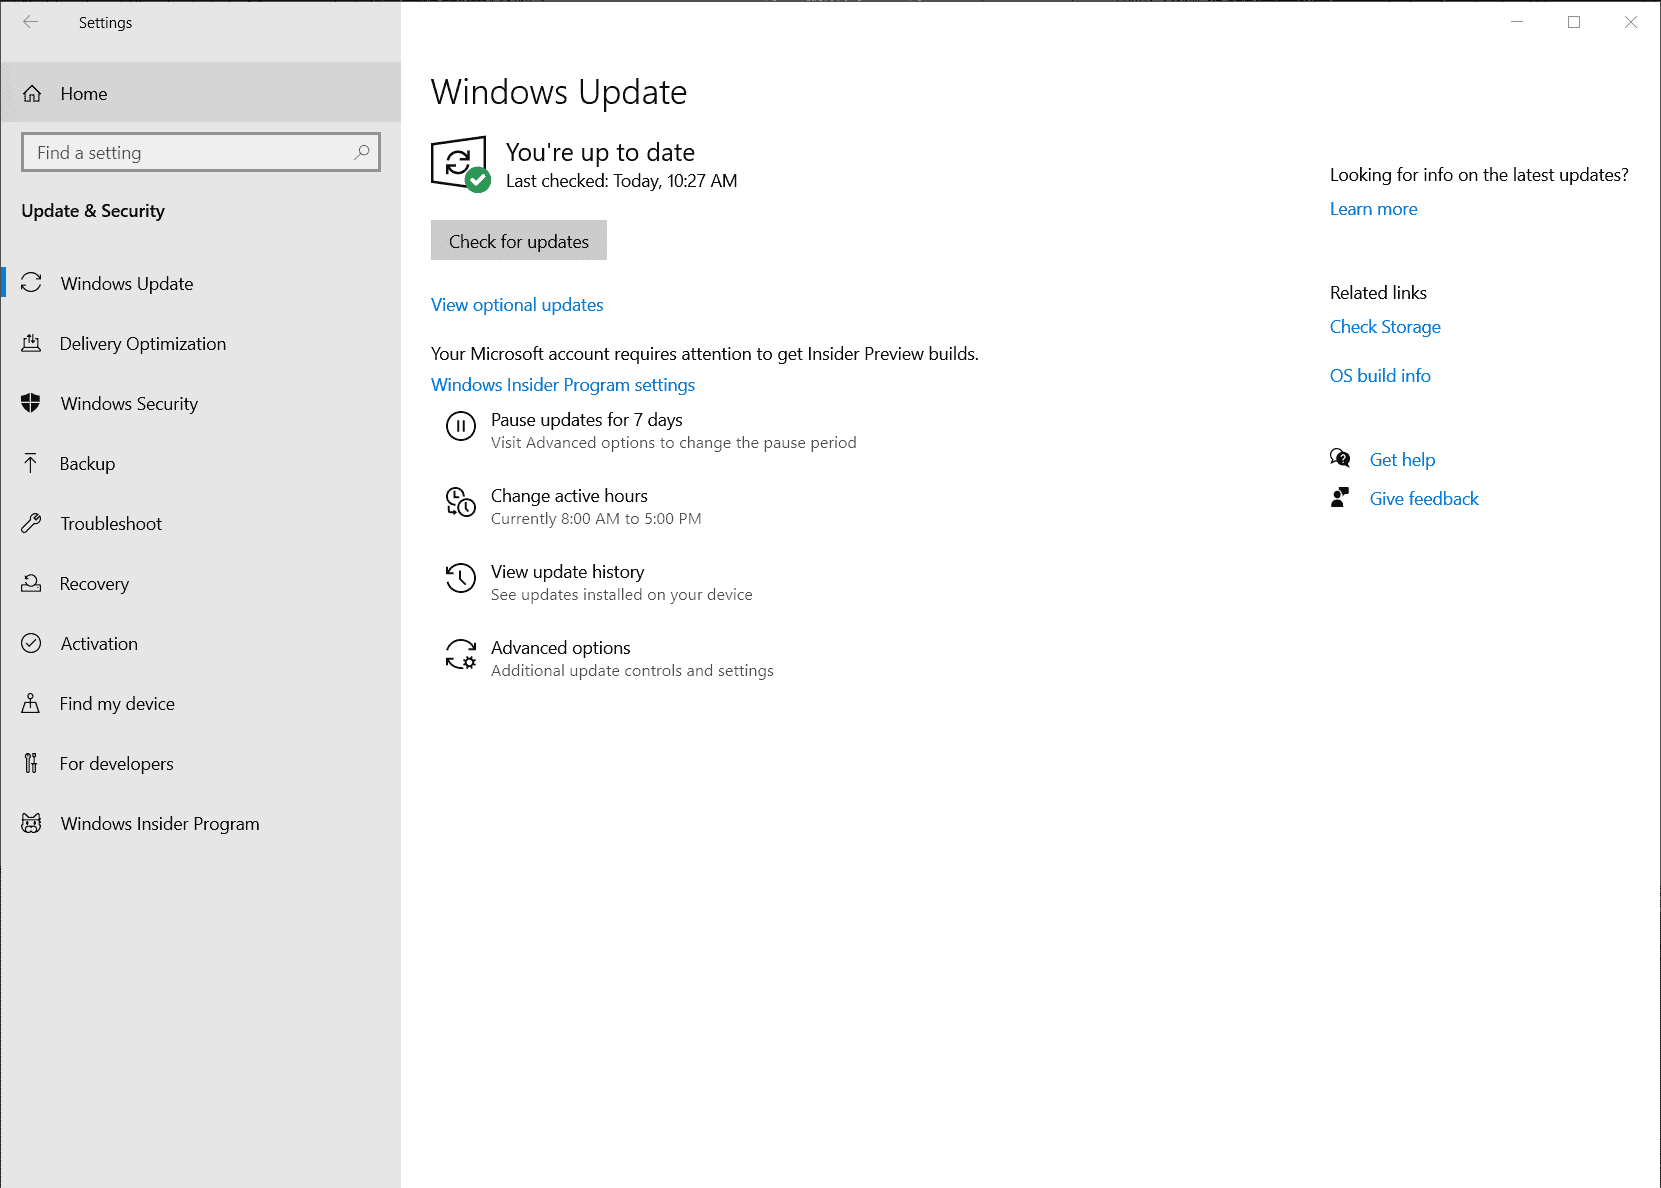 Windows 10 makes it easier to discover optional drivers